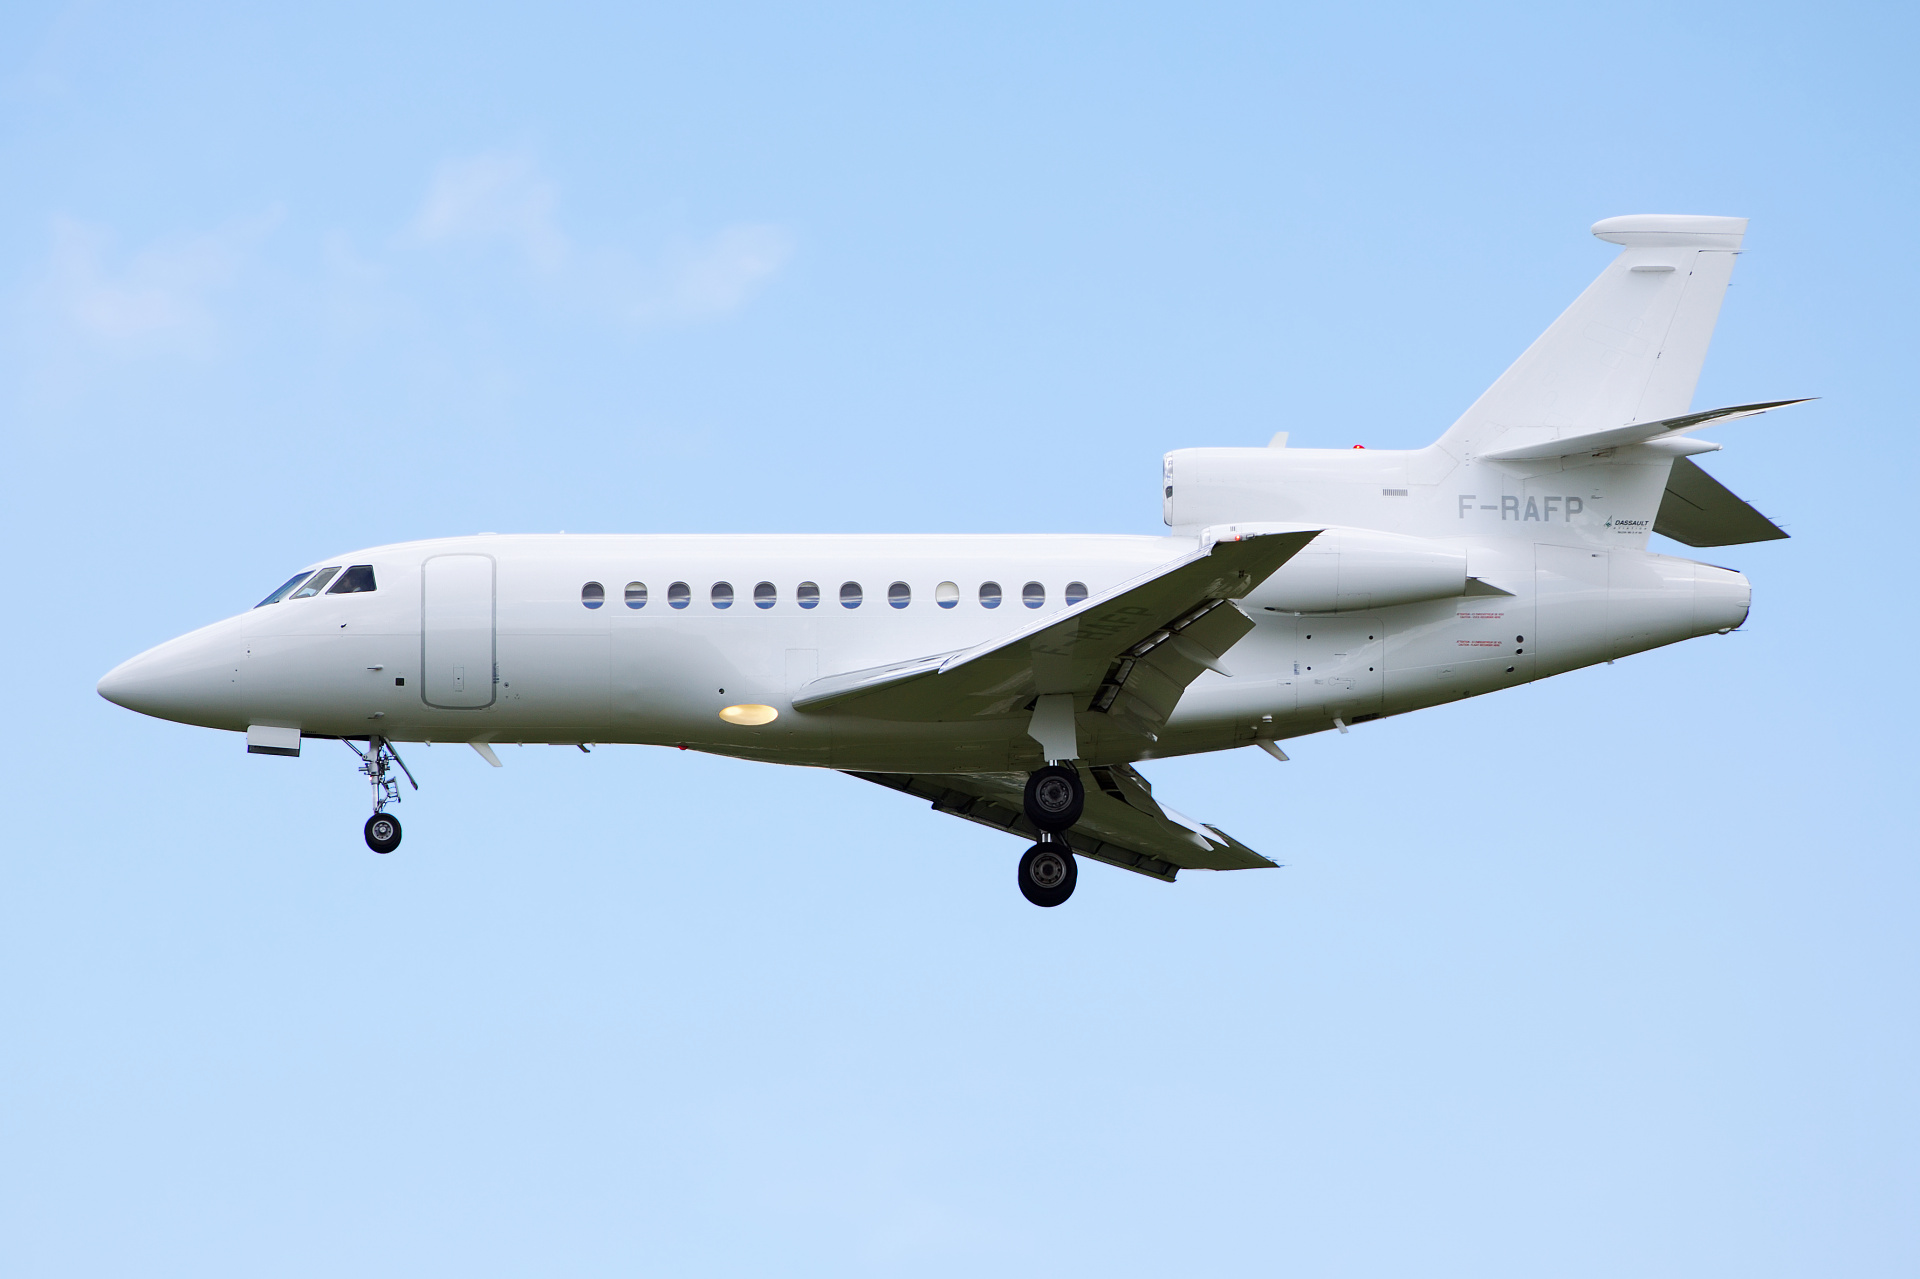 F-RAFP, French Air Force (Aircraft » EPWA Spotting » Dassault Falcon 900)